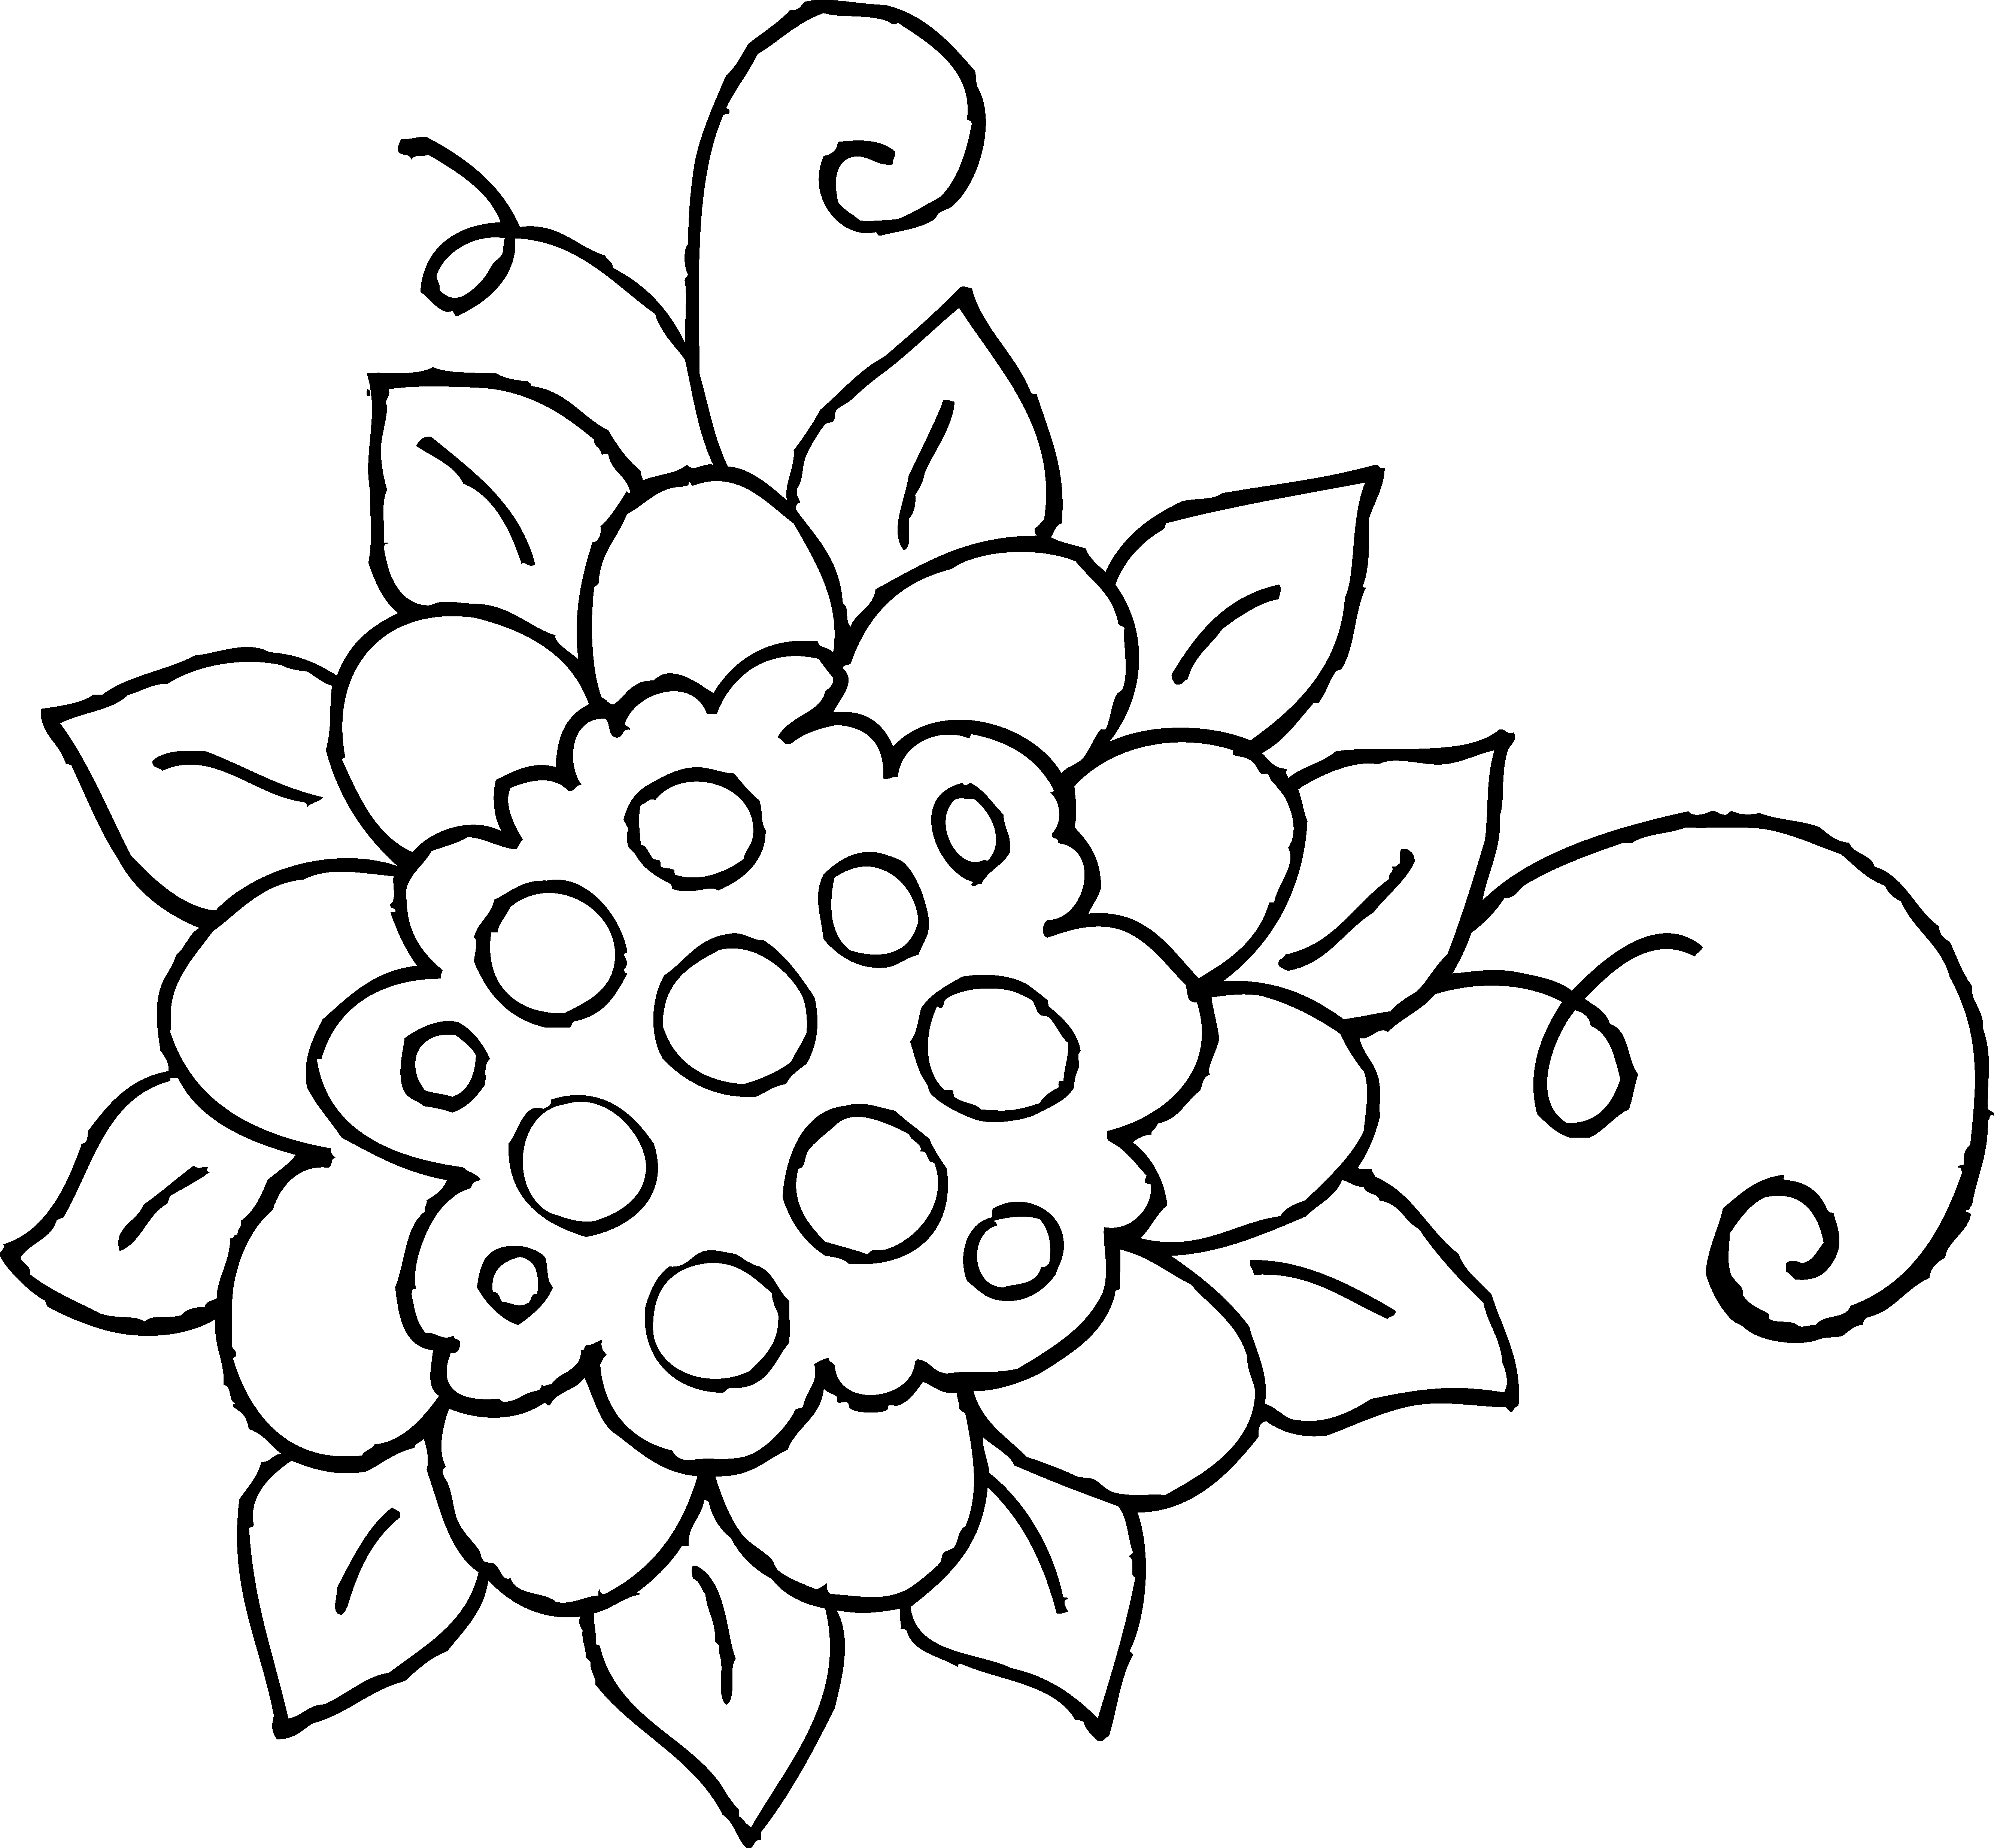 A White Flower With Leaves On A Black Background